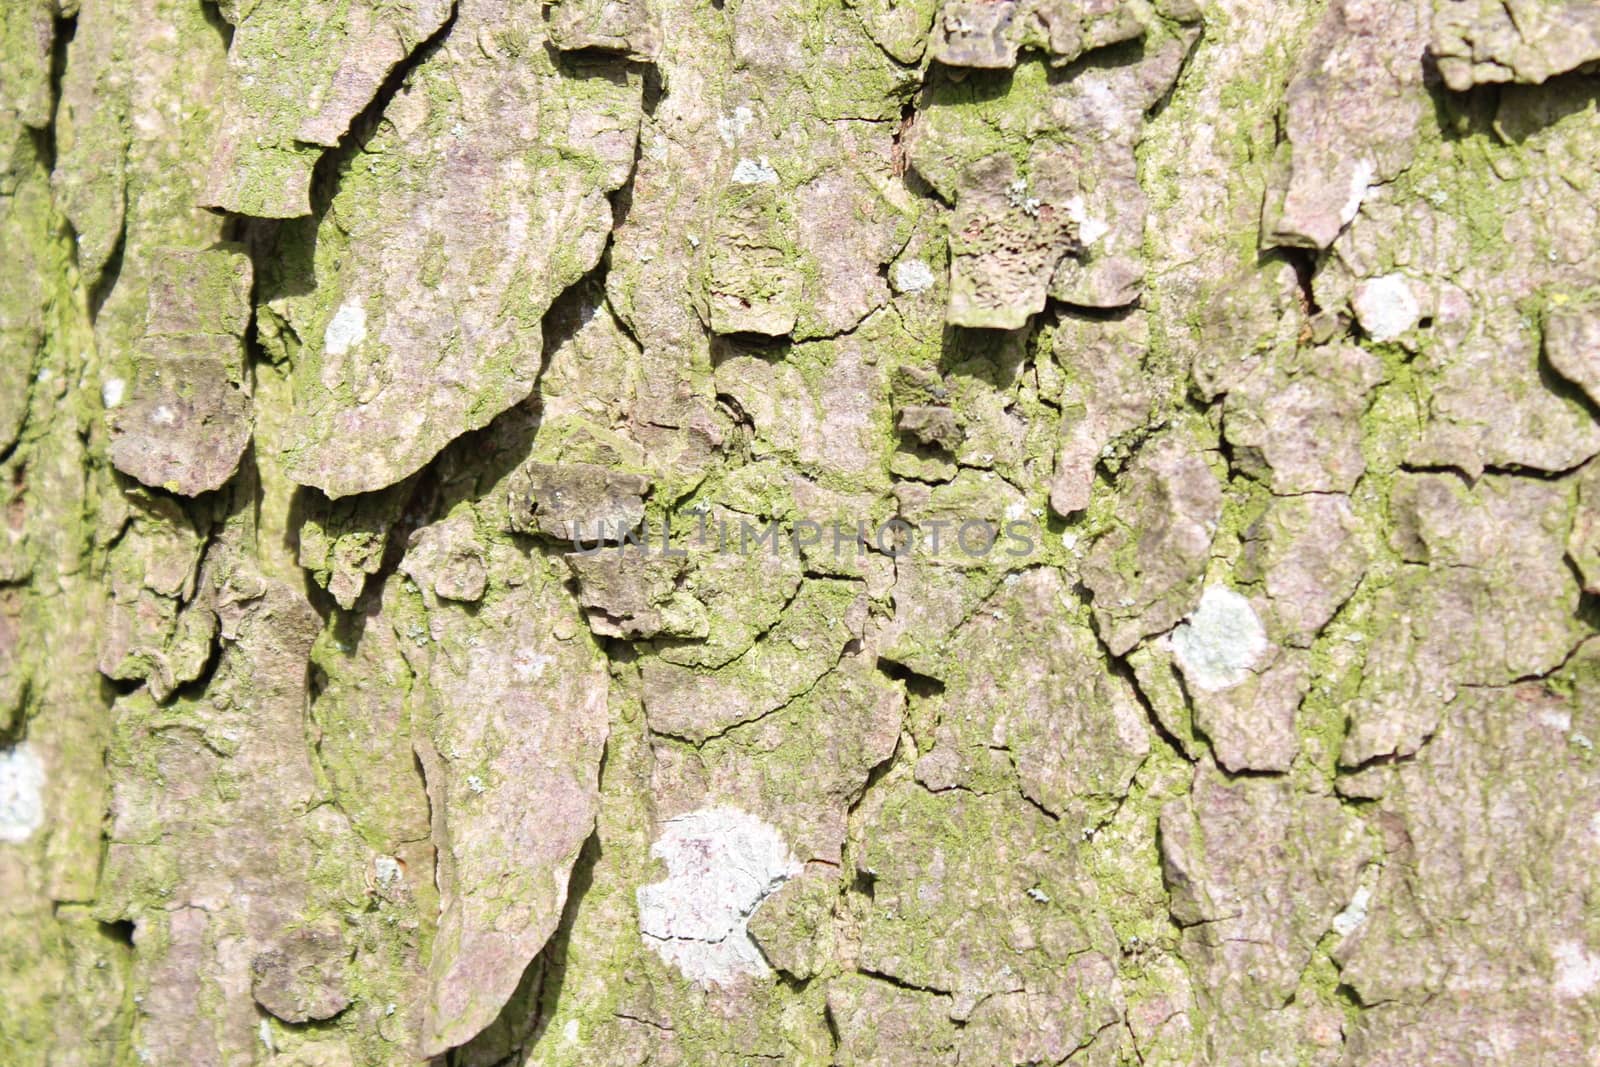 The picture a shows bark of a tree.